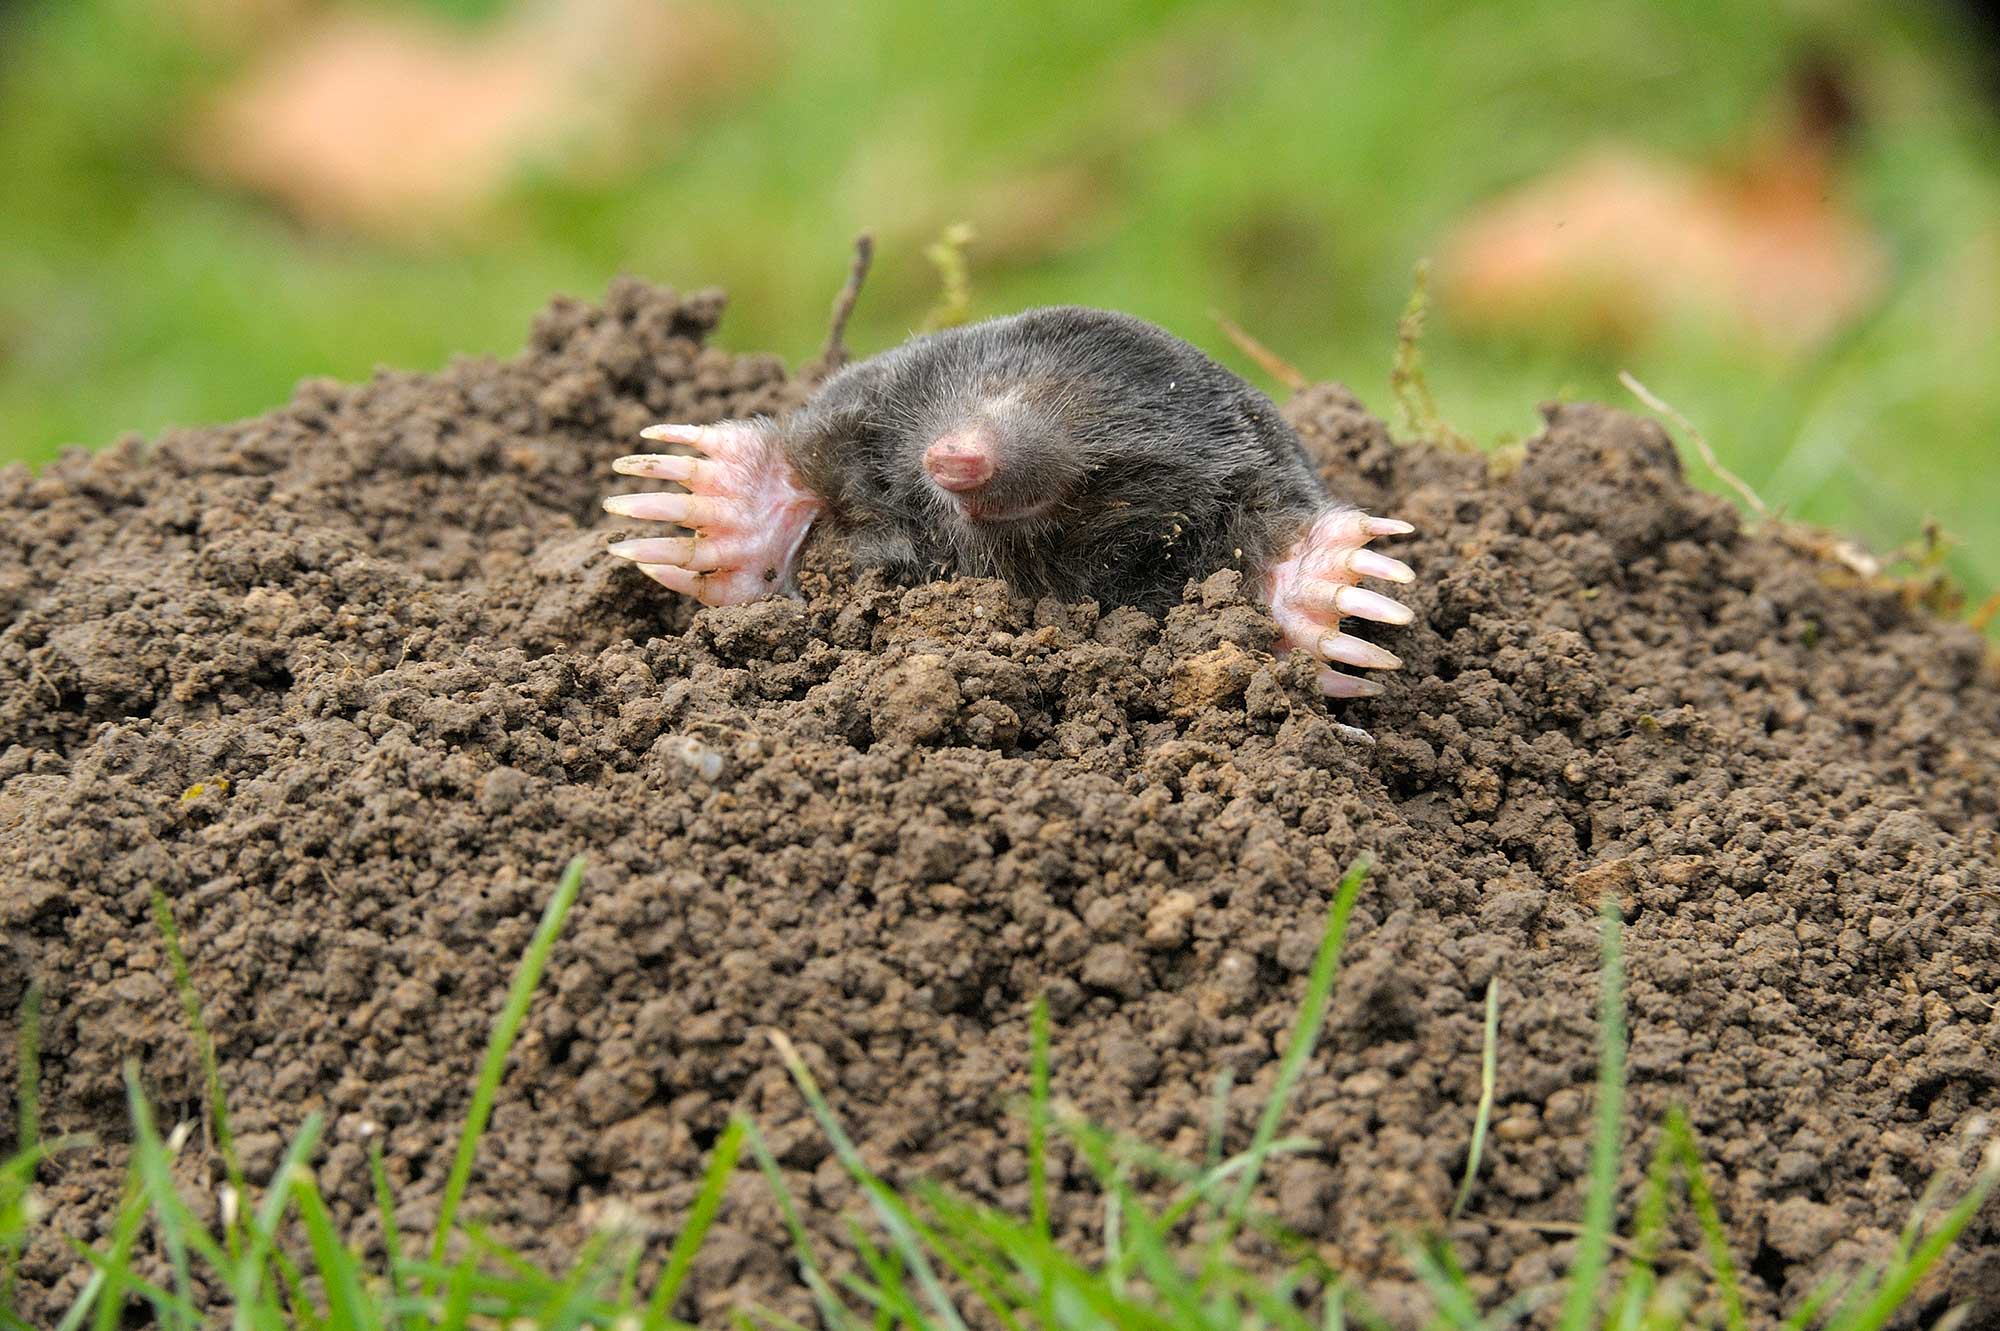 A mole emerging from its hole in the grass